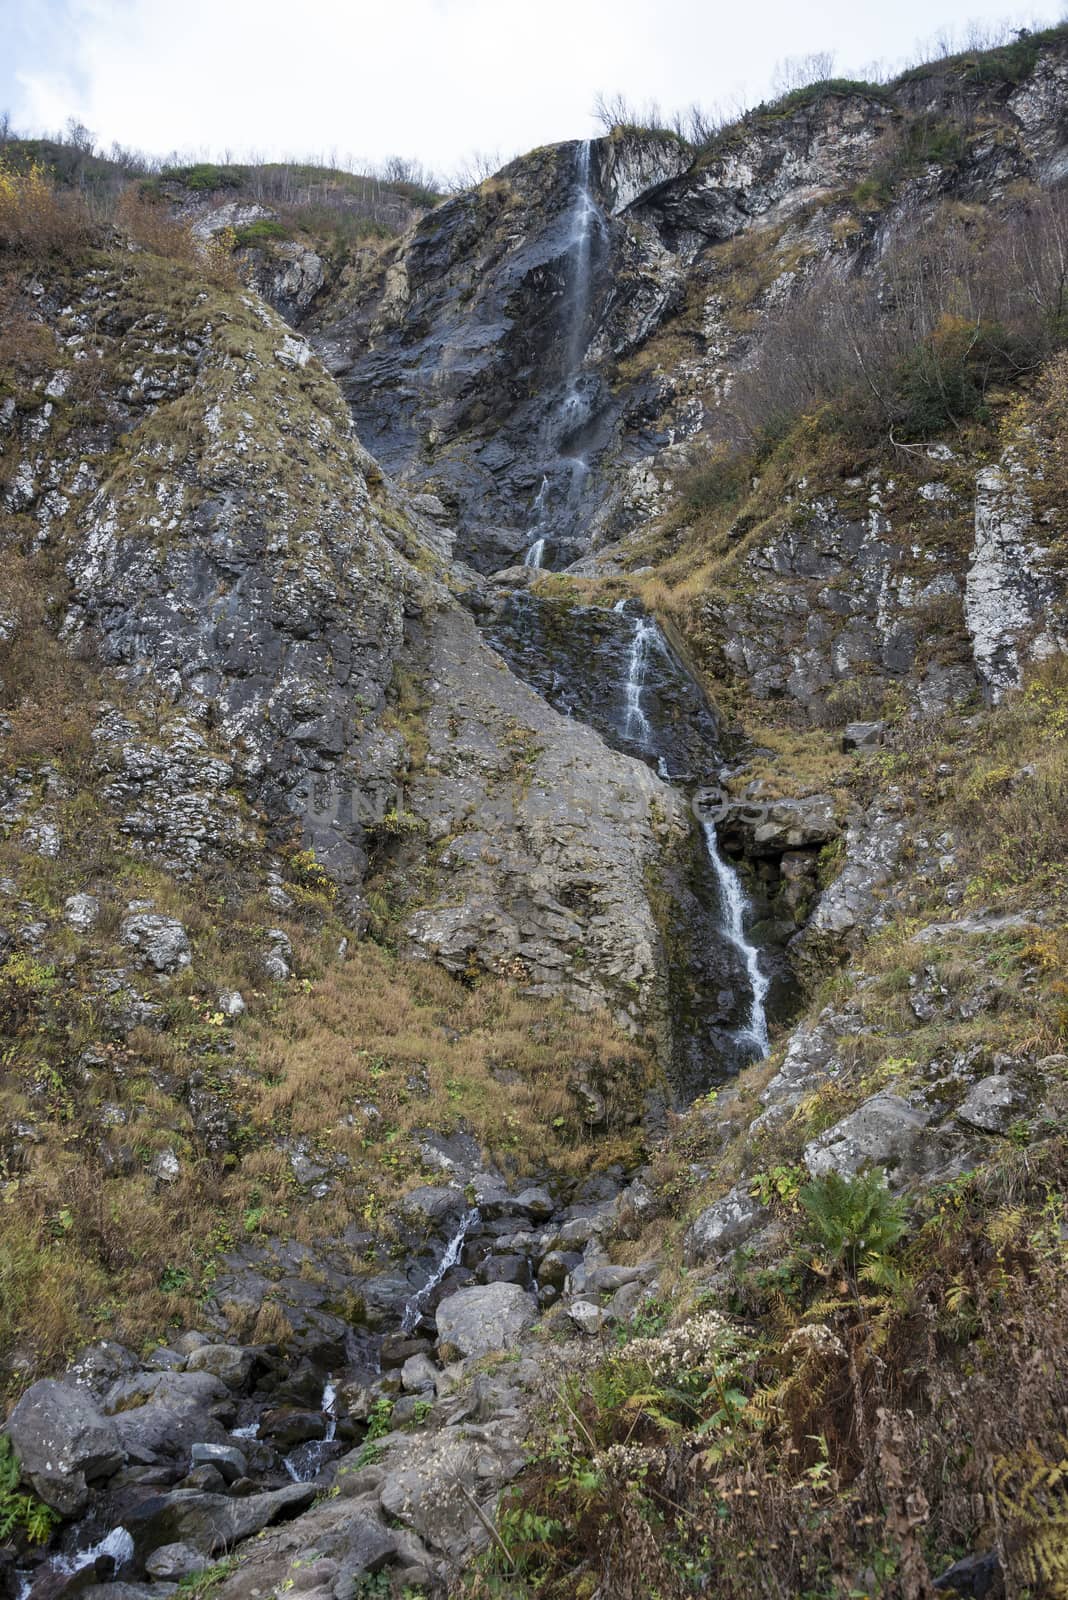 Polikarya waterfall in the Caucasus mountains near Sochi, Russia. Cloudy day 26 October 2019 by butenkow